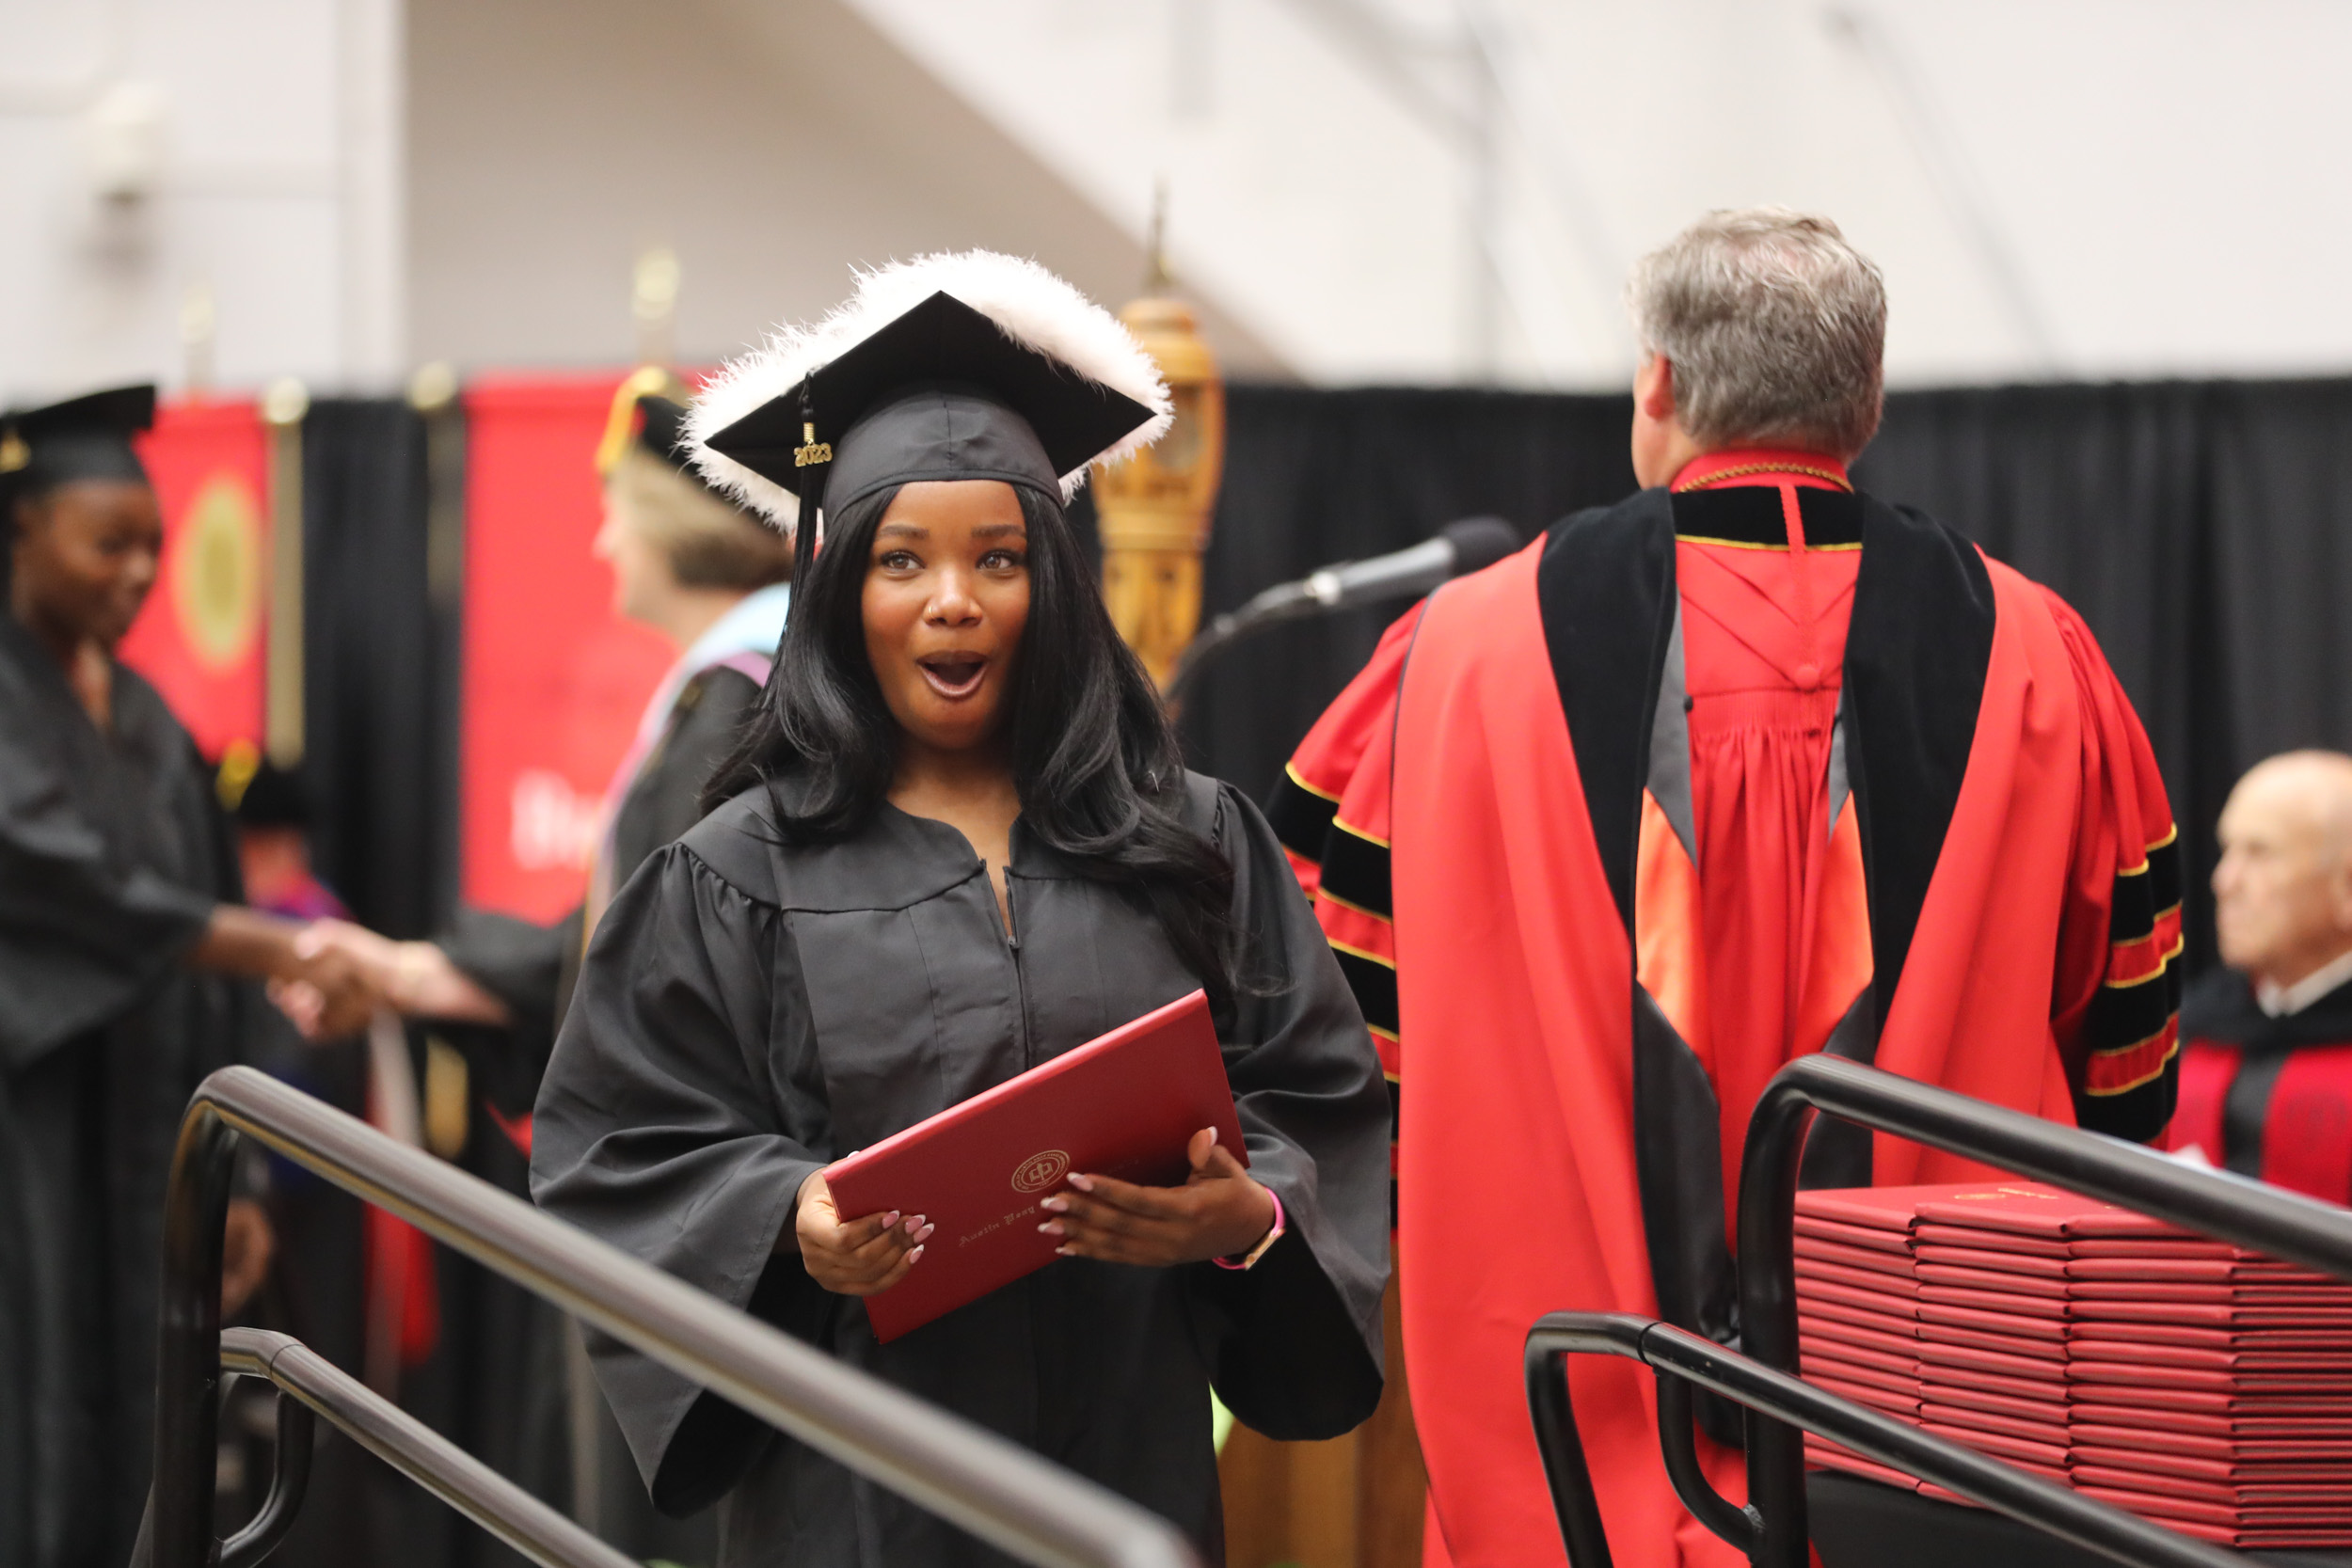 Austin Peay celebrates the commencement of over 600 Students, including ...